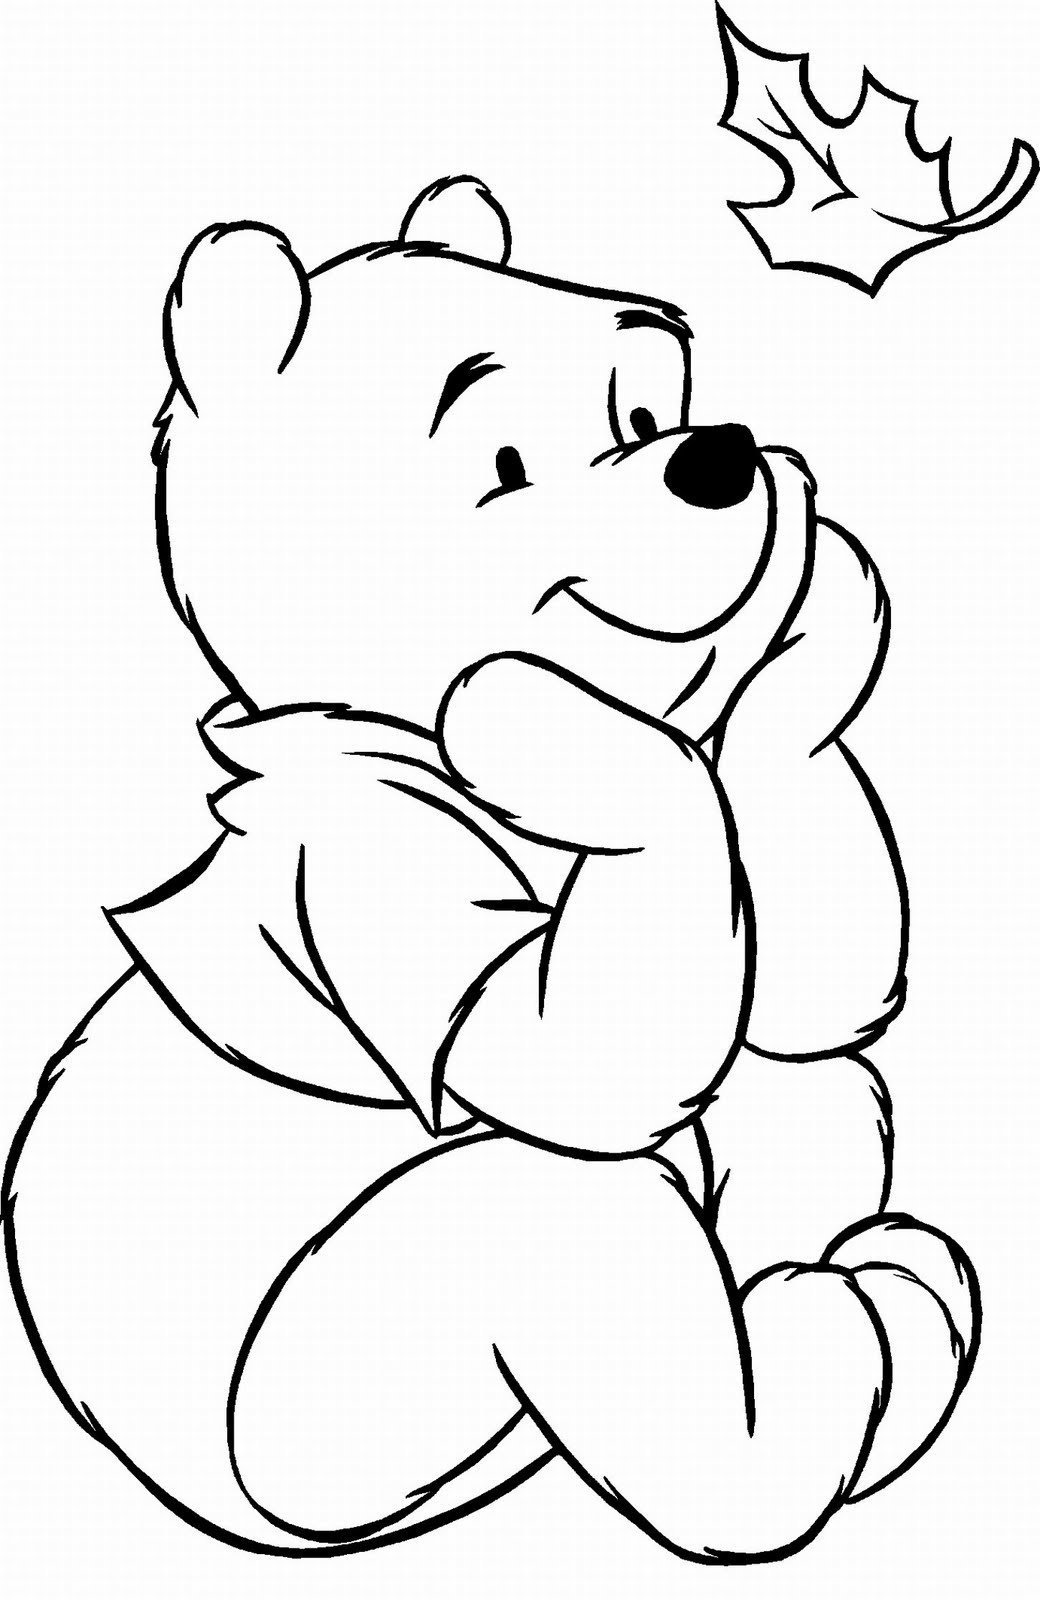 Disney Thanksgiving Coloring Pages Winnie The Pooh Coloring Wallpapers Download Free Images Wallpaper [coloring654.blogspot.com]